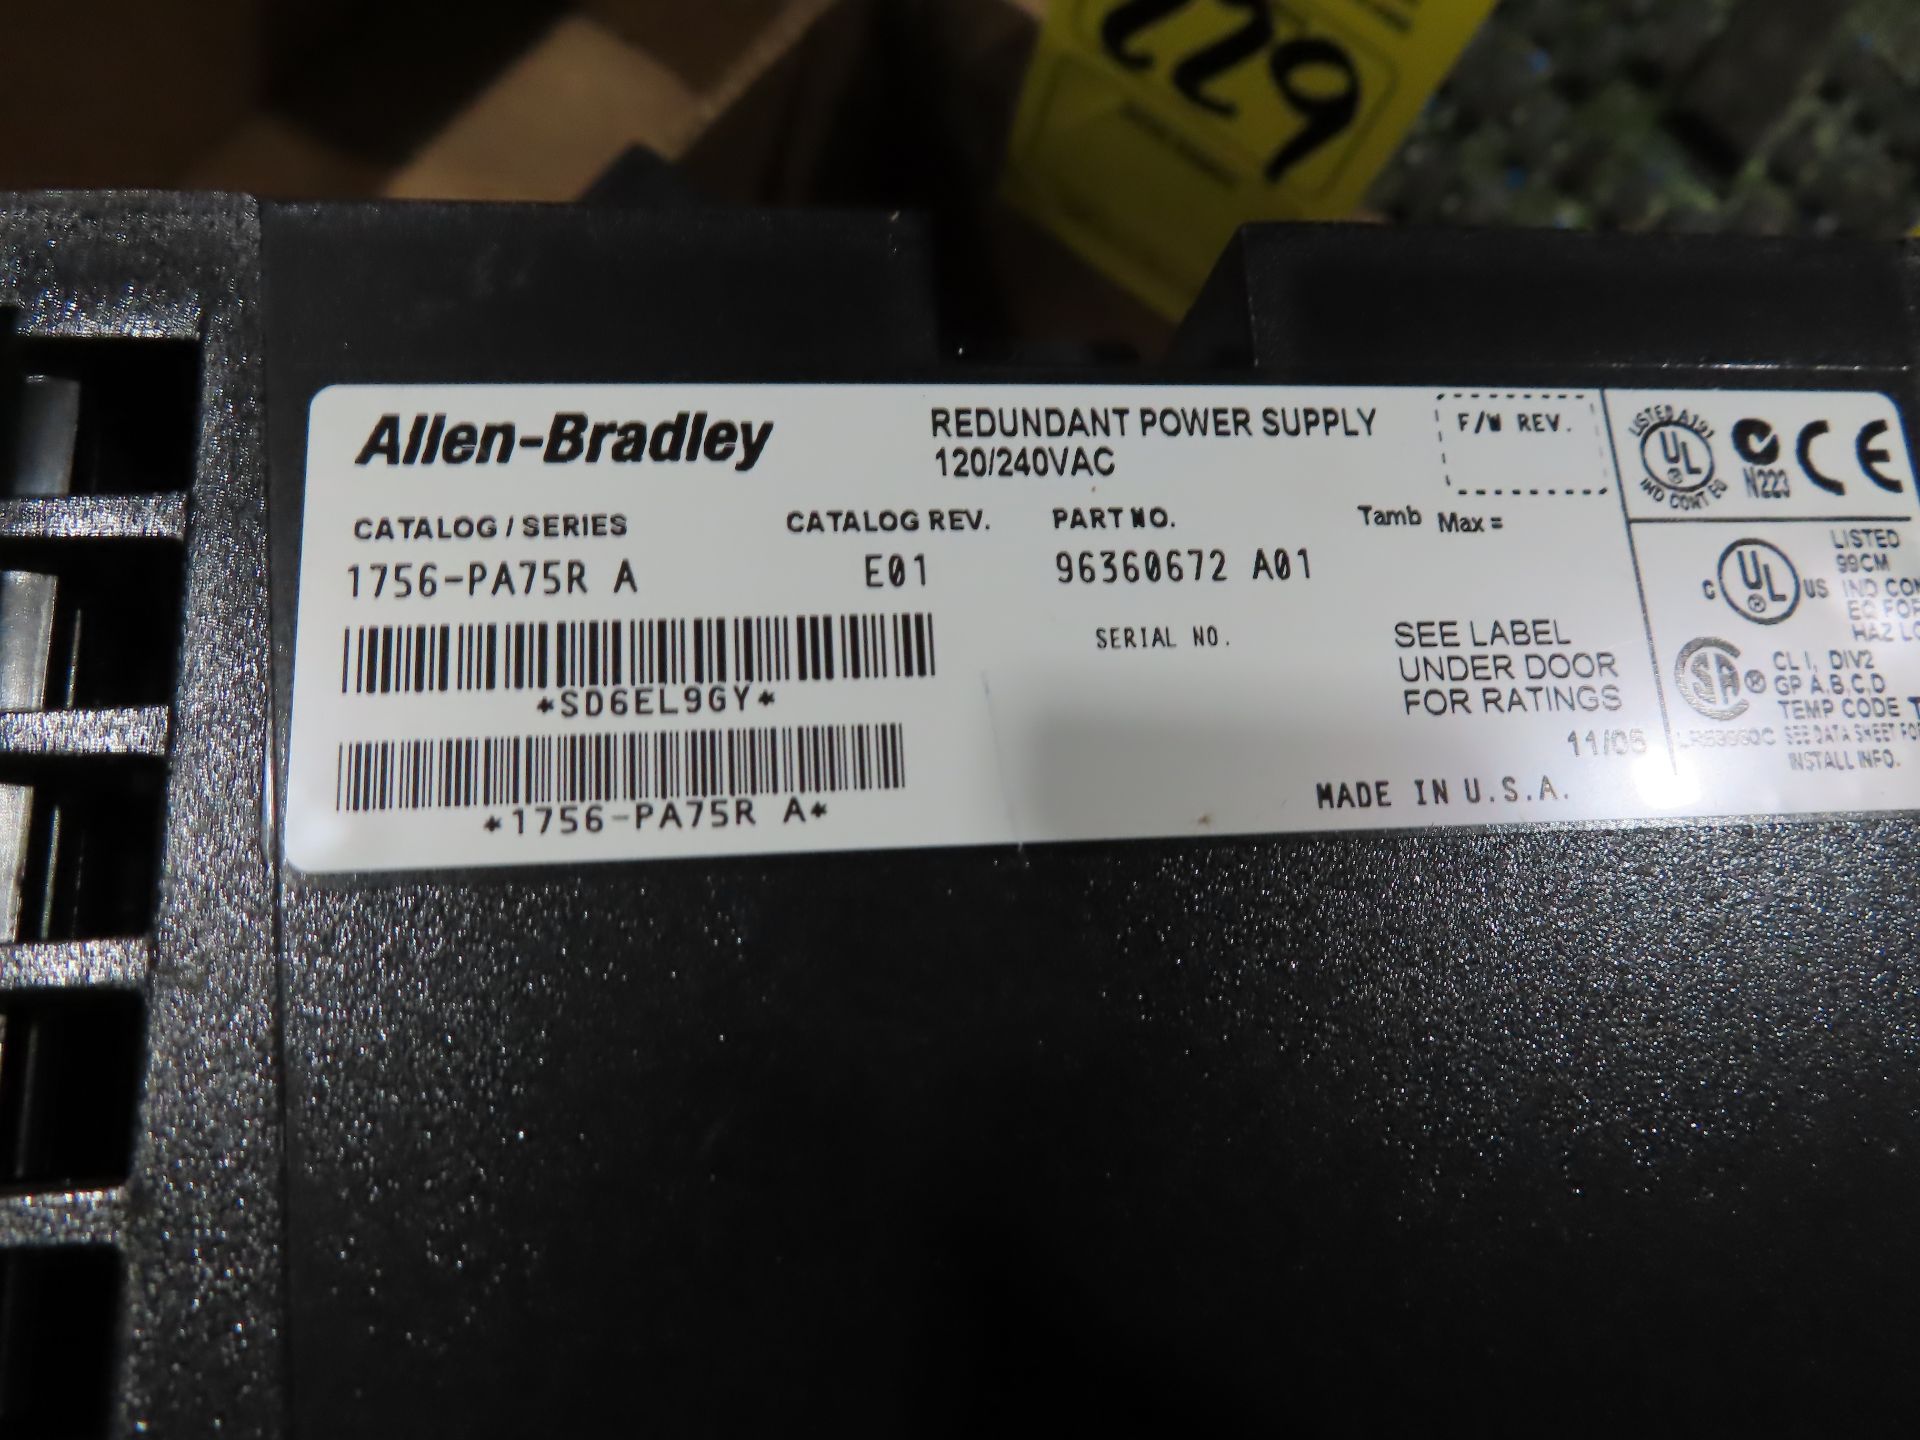 Allen Bradley catalog 1756-PA75R-A redundant power supply, as always, with Brolyn LLC auctions, - Image 2 of 2